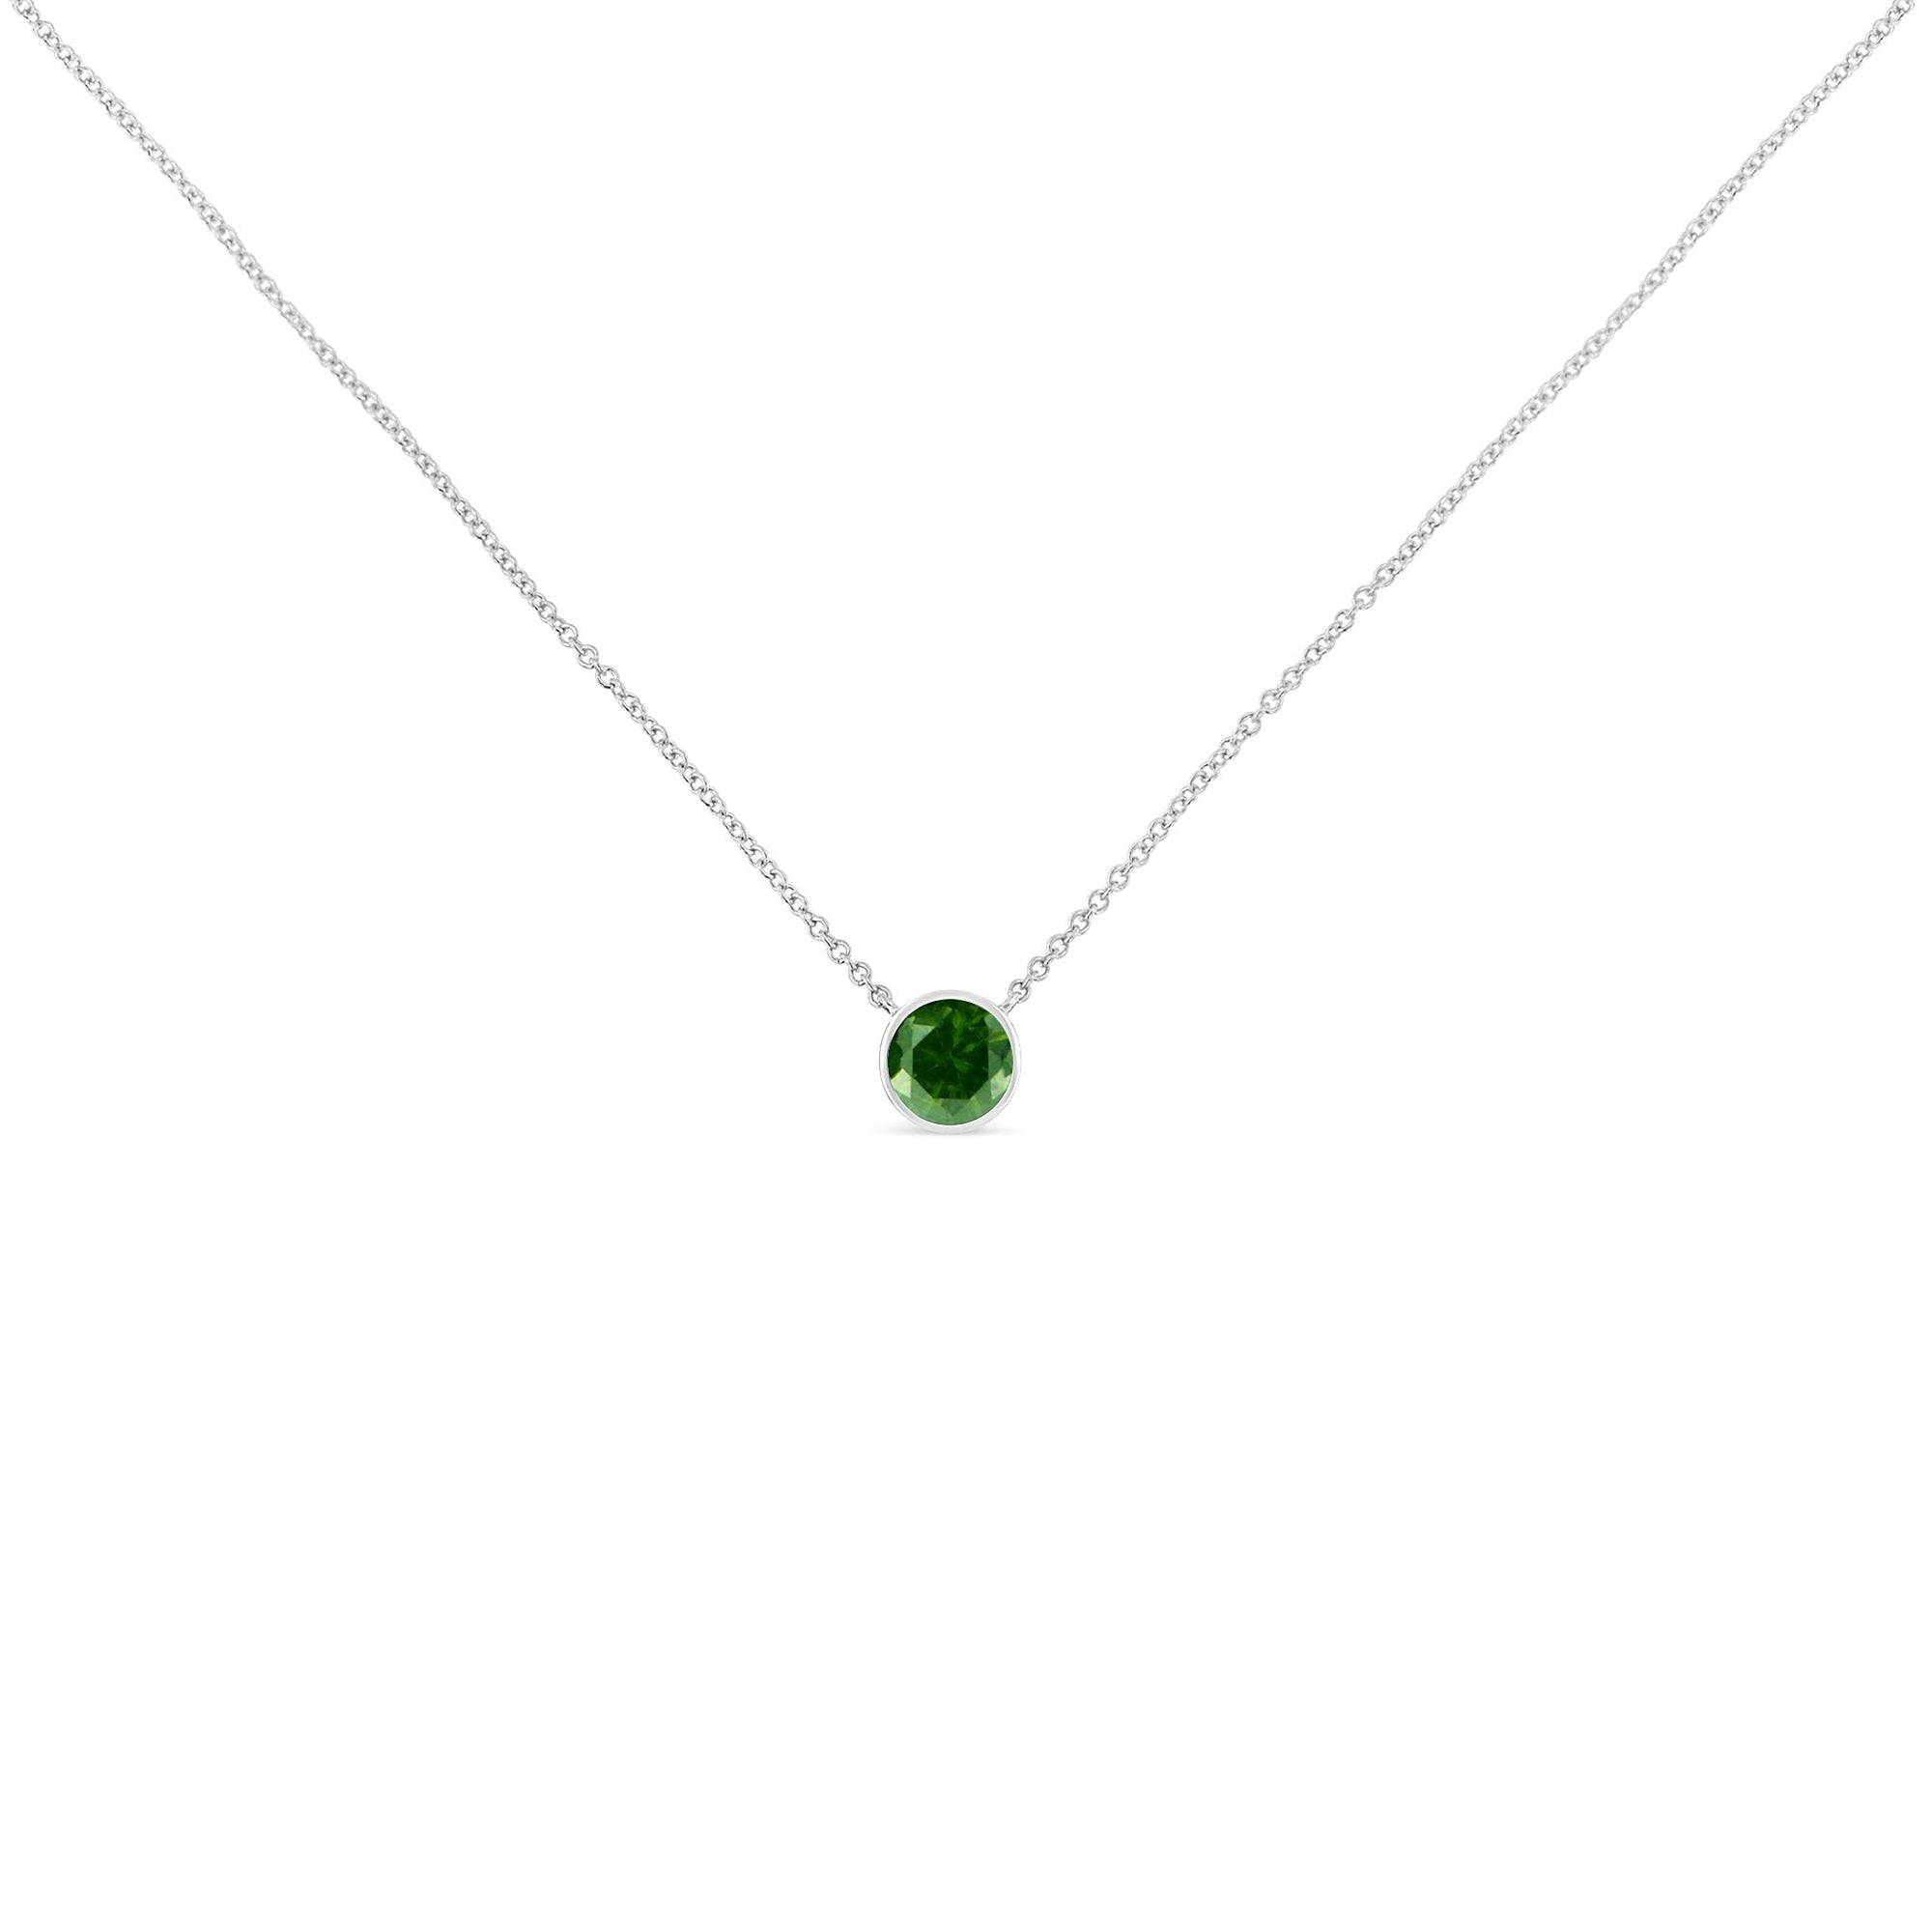 .925 Sterling Silver 1/5 Cttw Bezel Set Solitaire Treated Green Diamond 18" Pendant Necklace (Treated Green Color, I2-I3 Clarity) - LinkagejewelrydesignLinkagejewelrydesign